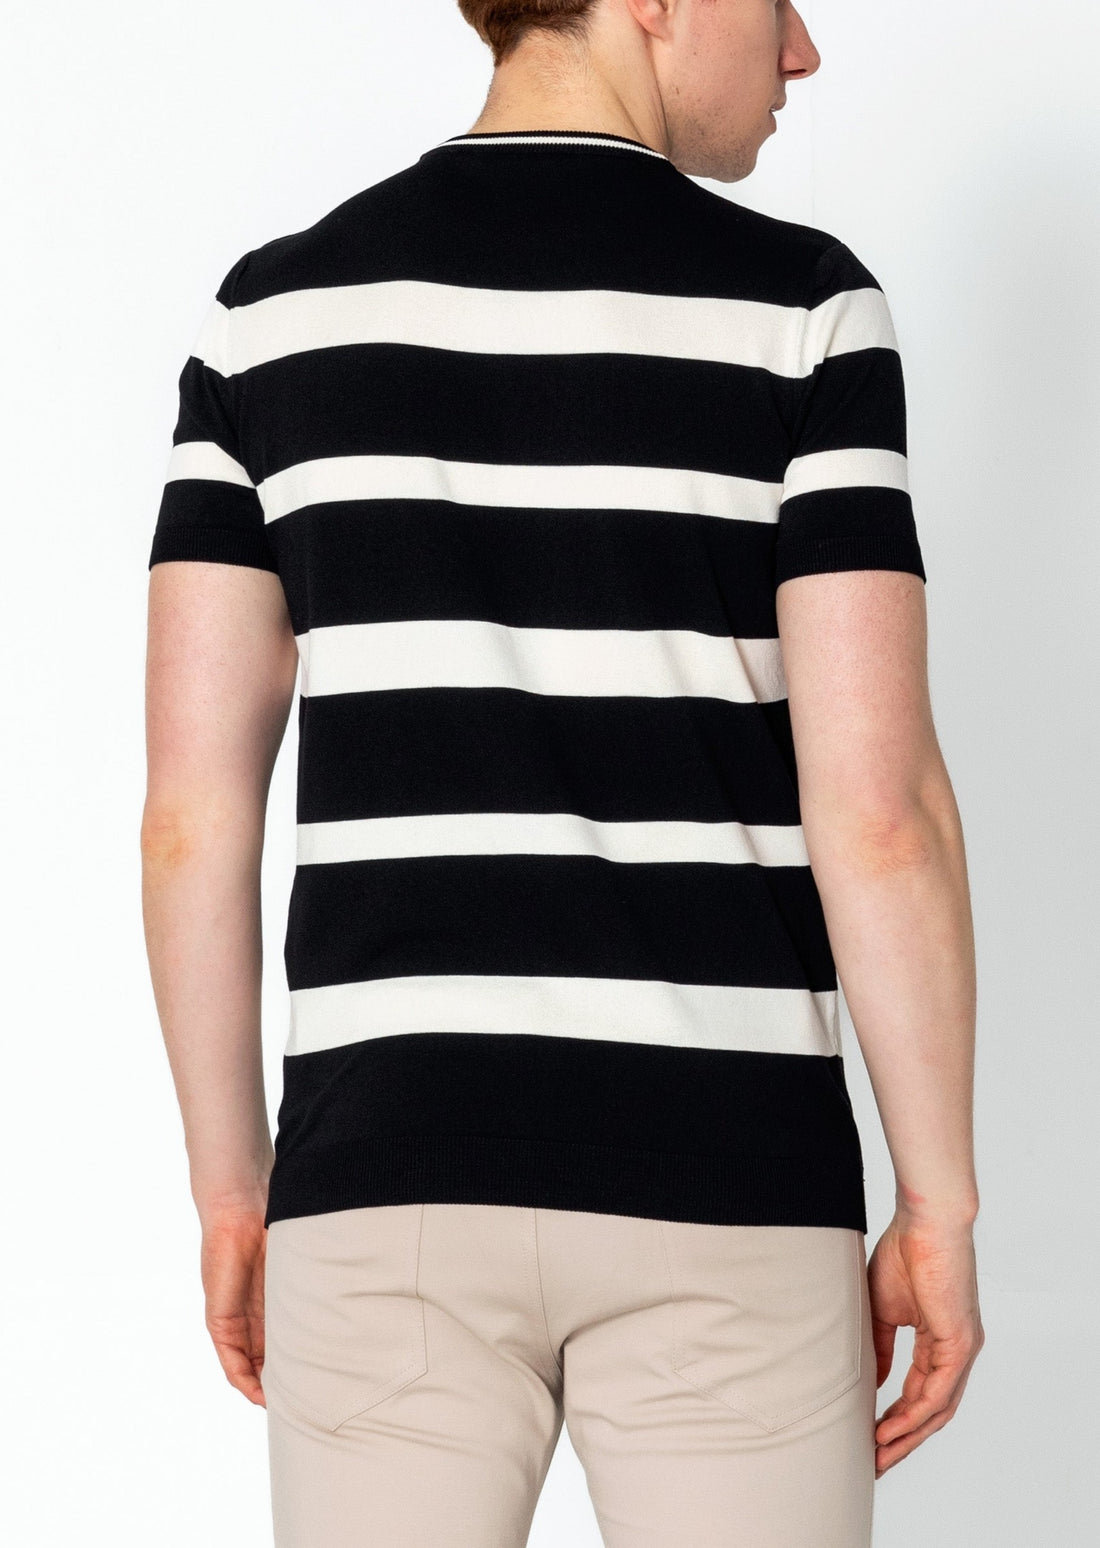 Crew-neck Knitted Striped Shirt - Black